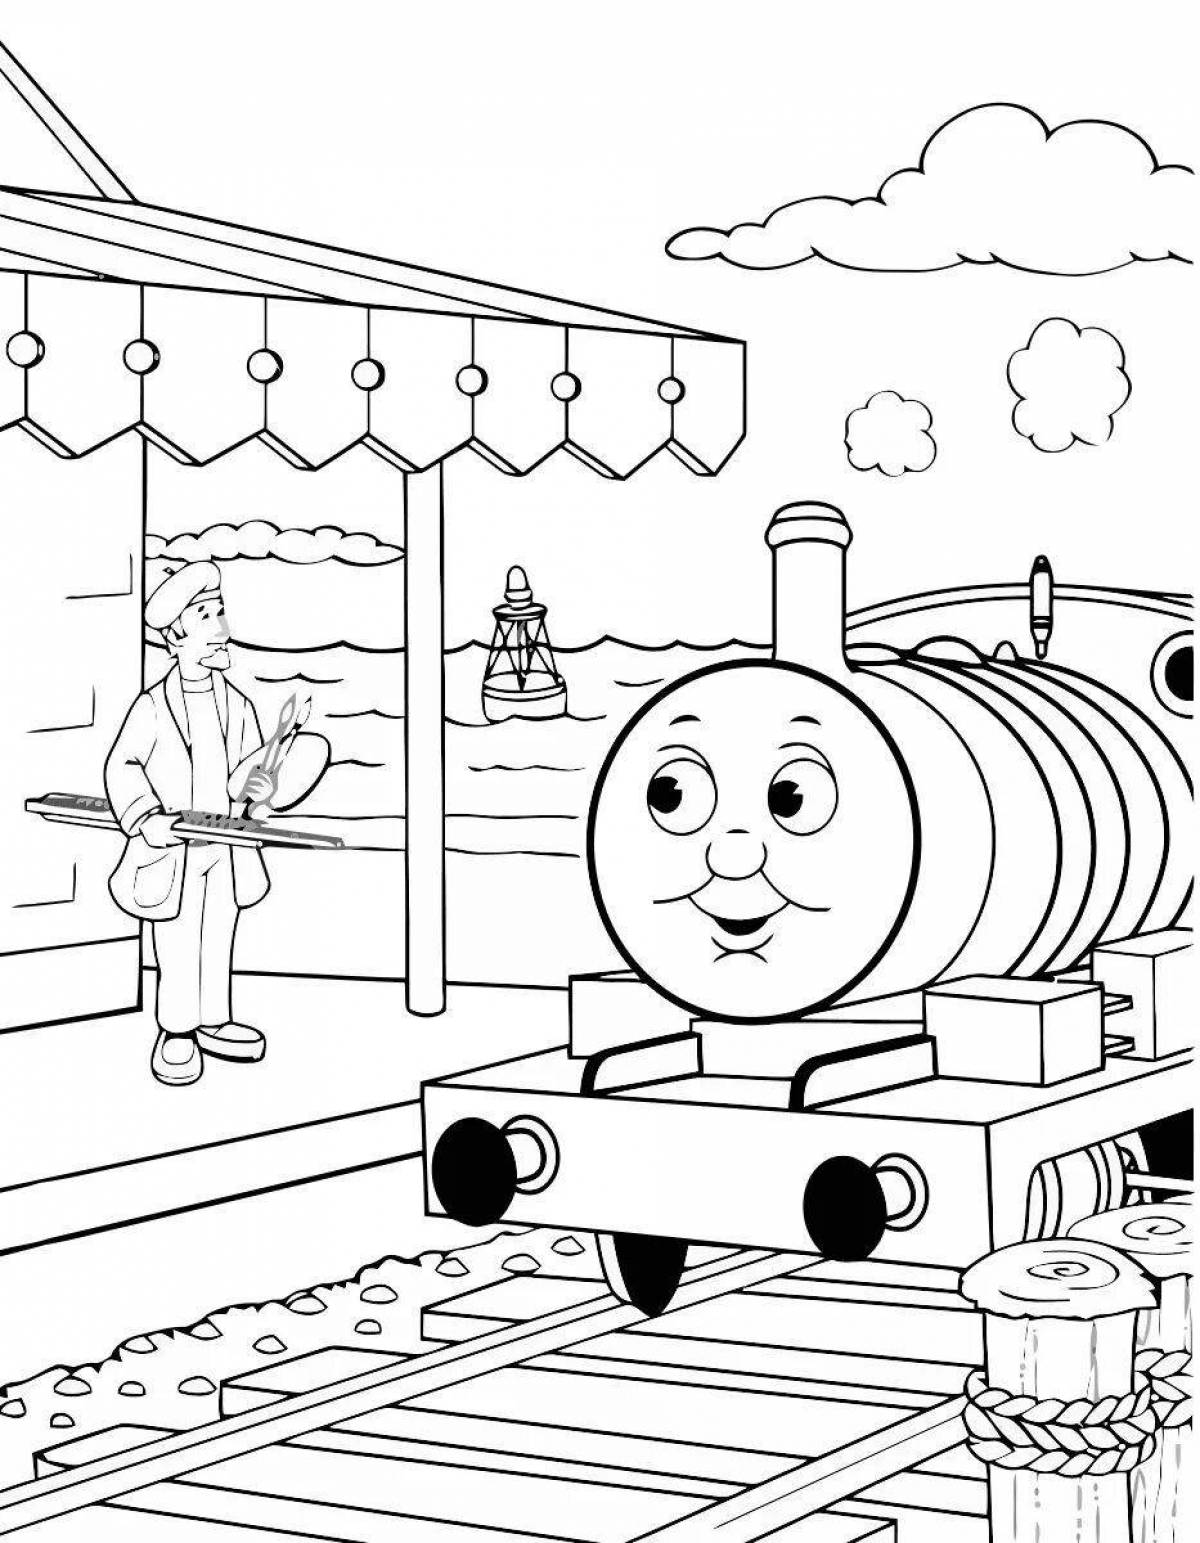 Incredible train station coloring book for kids